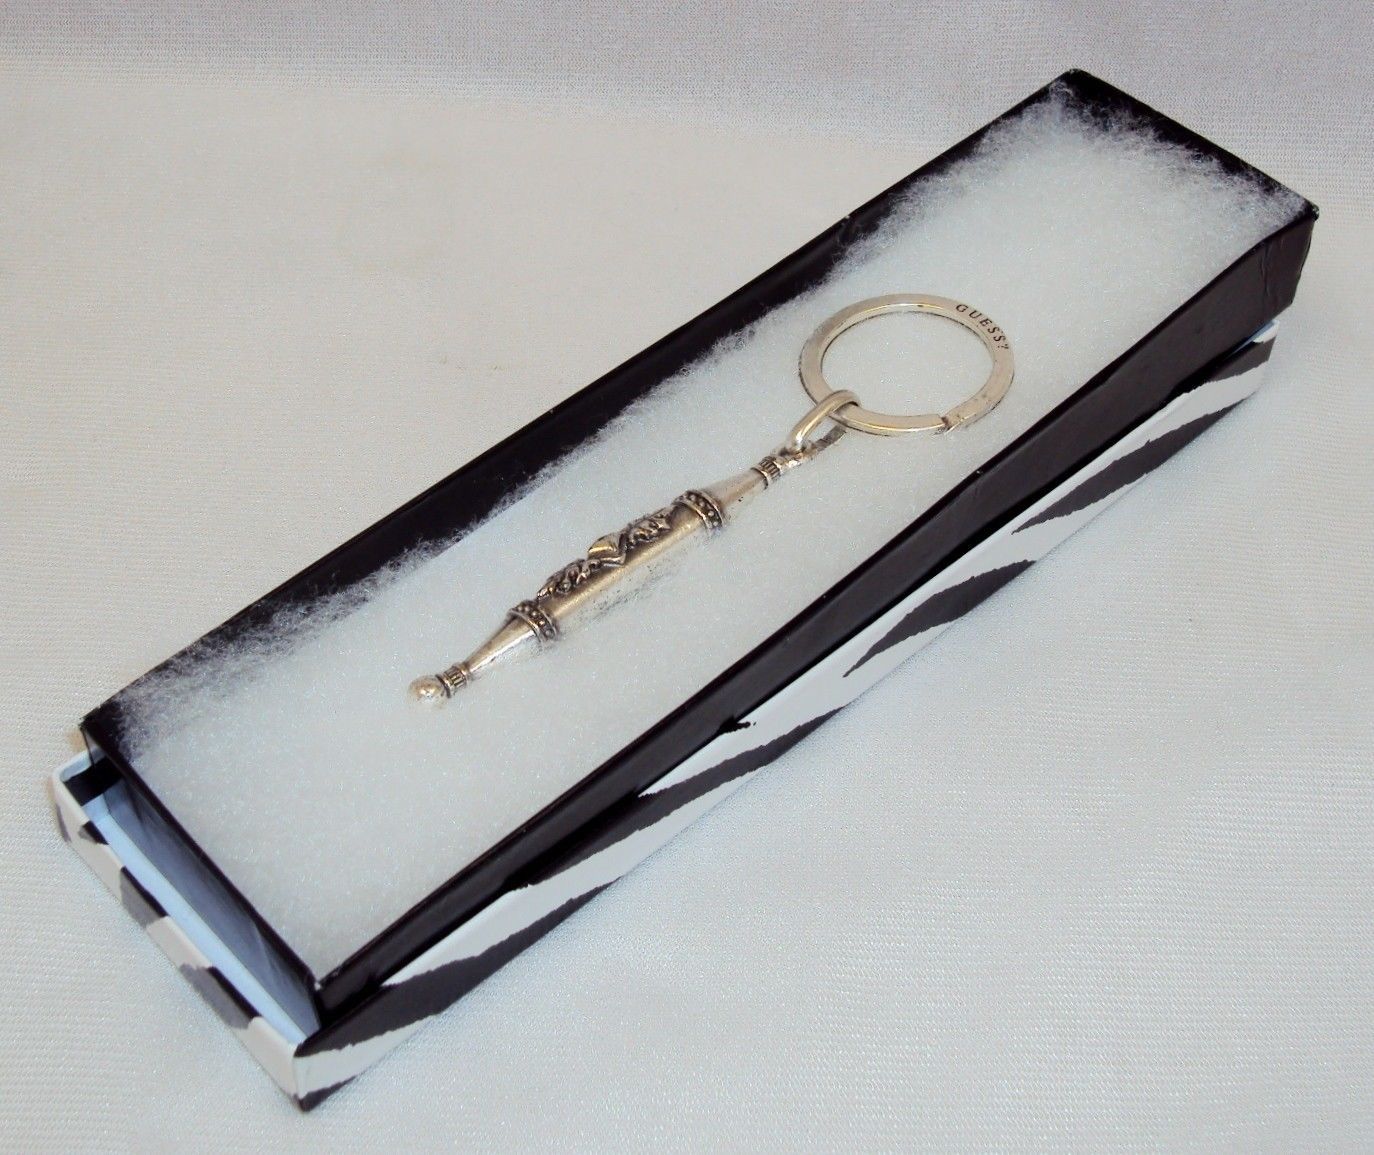 Primary image for Key Ring ~ GUESS? Branded, Cylinder Pendant w/Raised Relief Graphics  #5230240